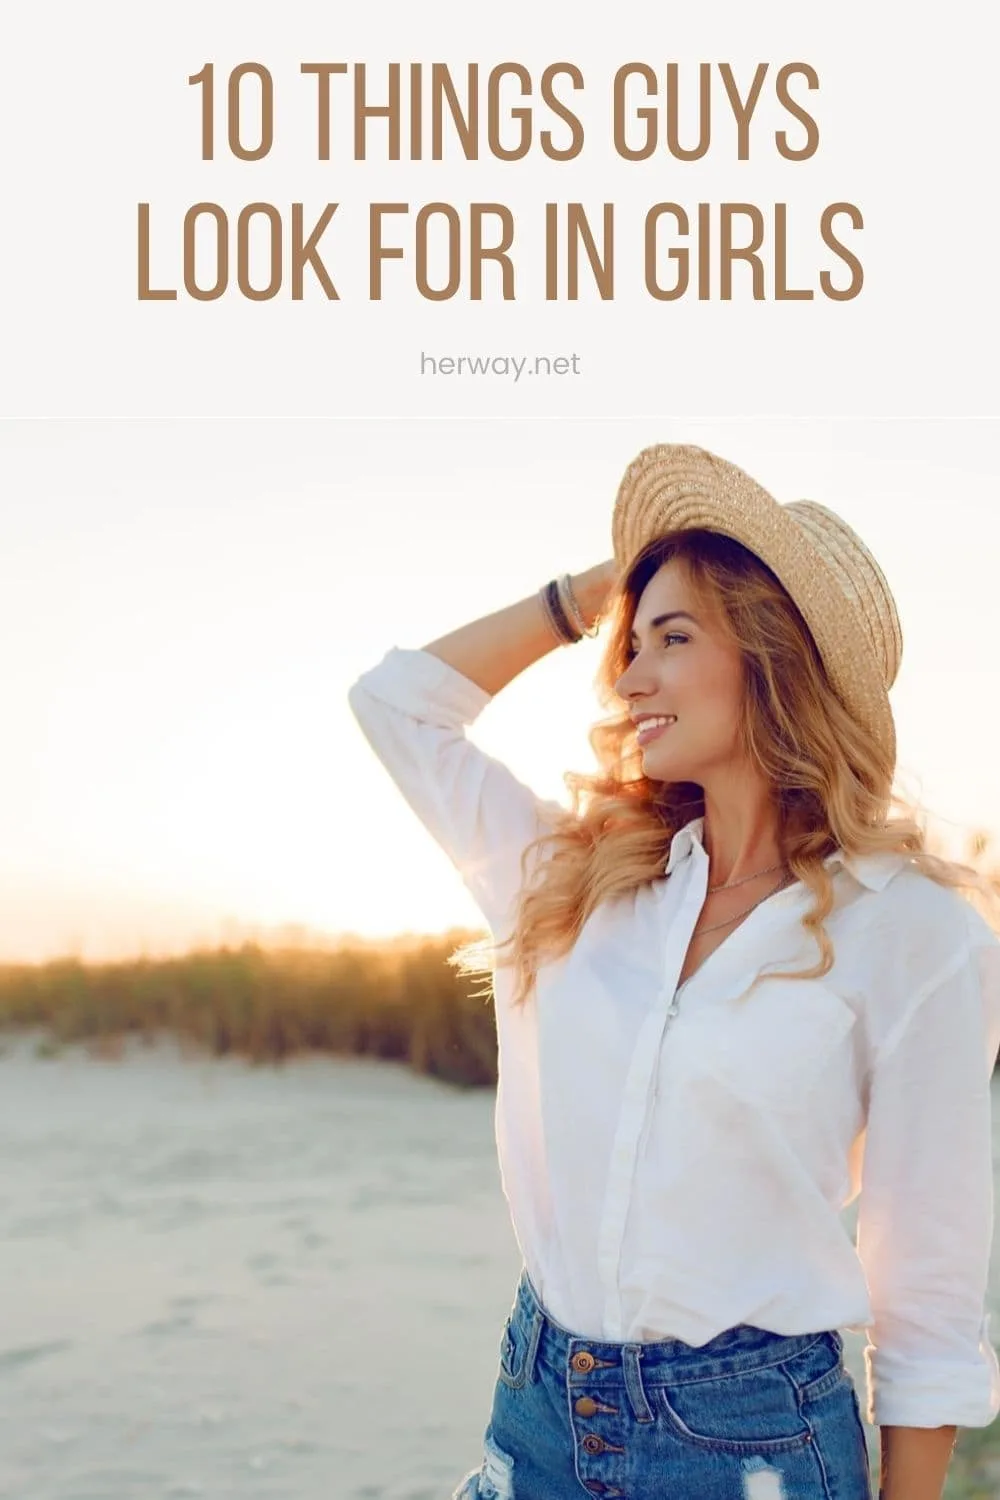 10 Things Guys Look For In Girls